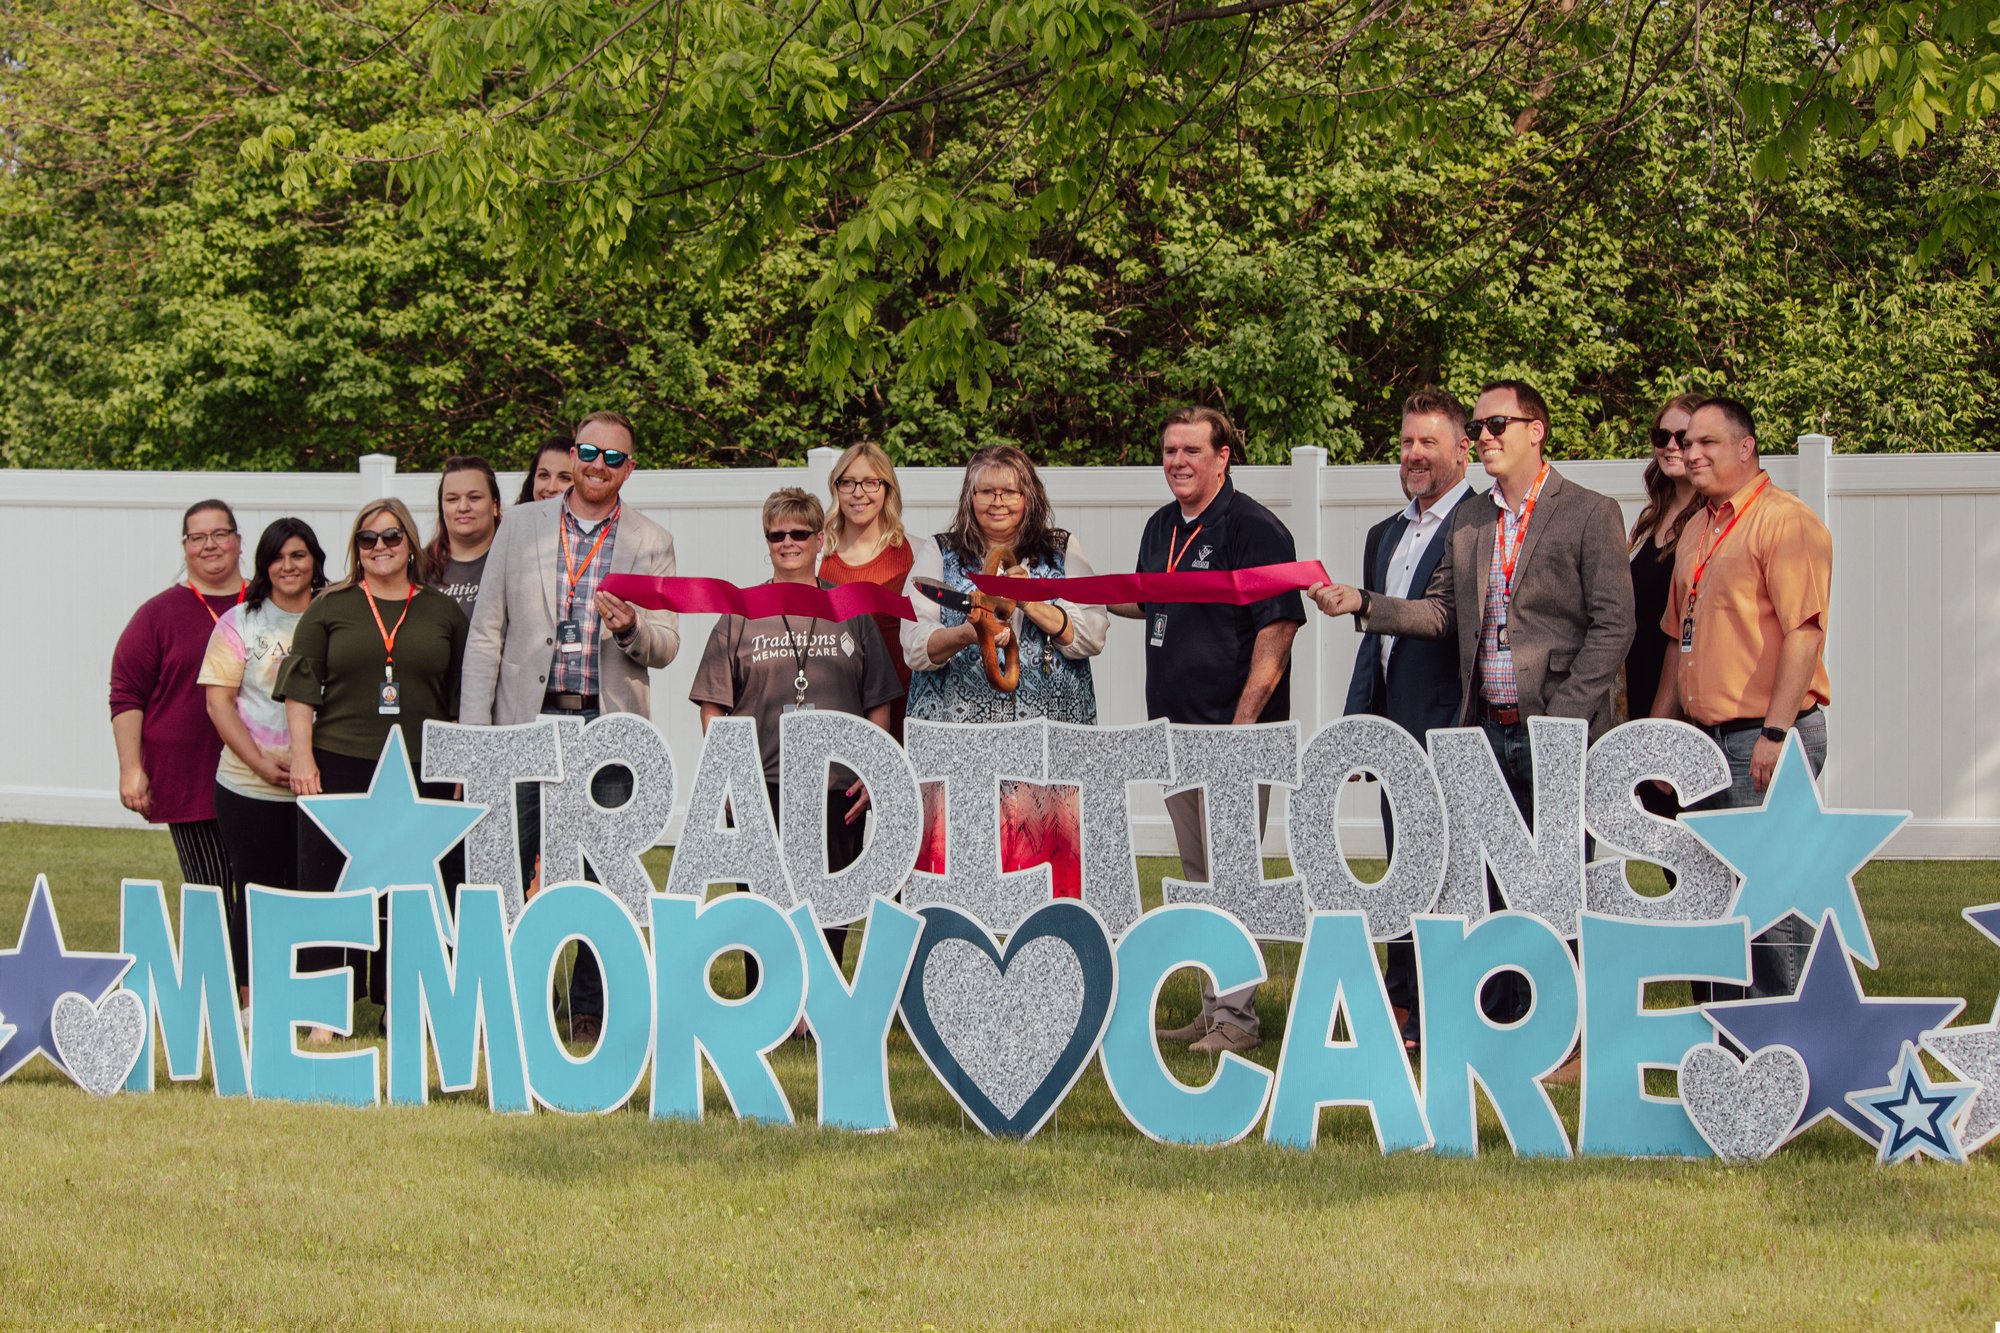 Traditions Memory Care